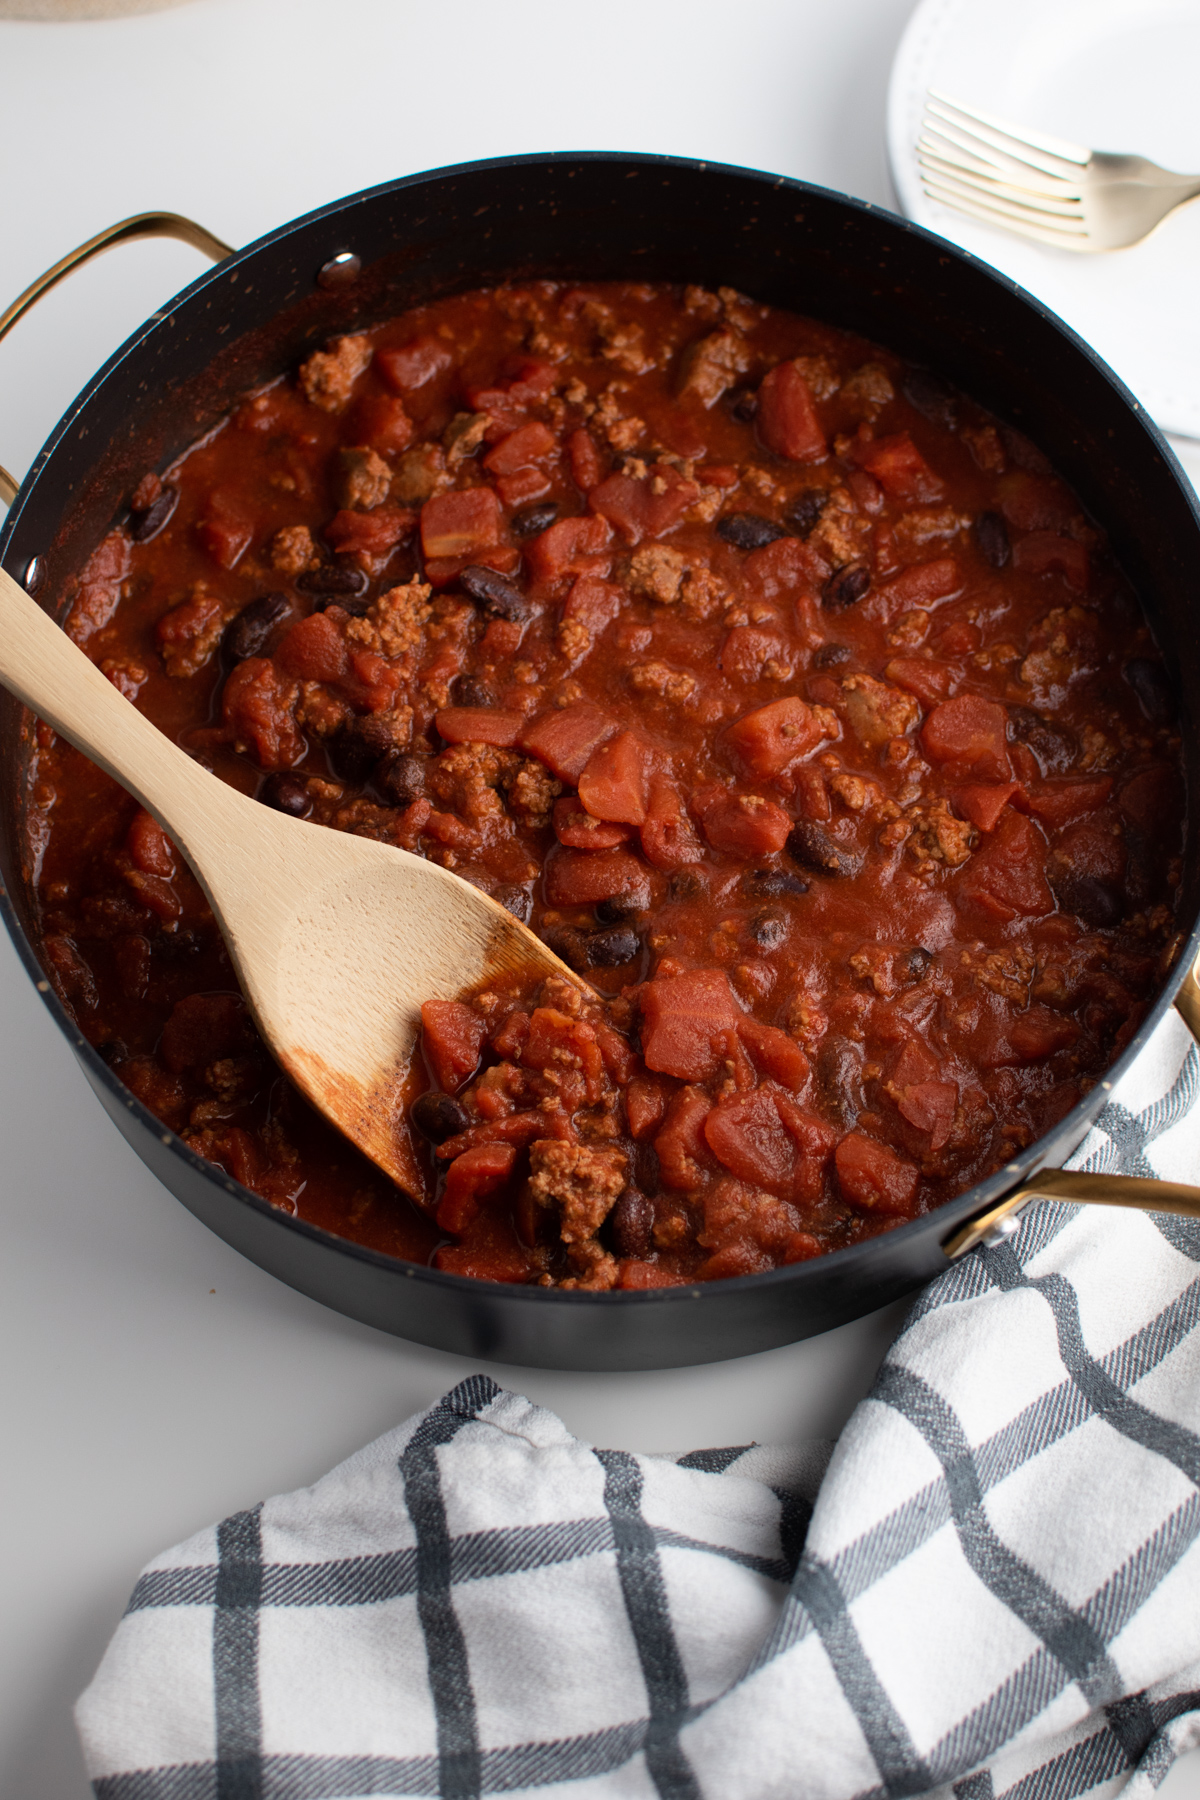 How Long Is Leftover Chili Good For? (Room Temp, Fridge, or ...